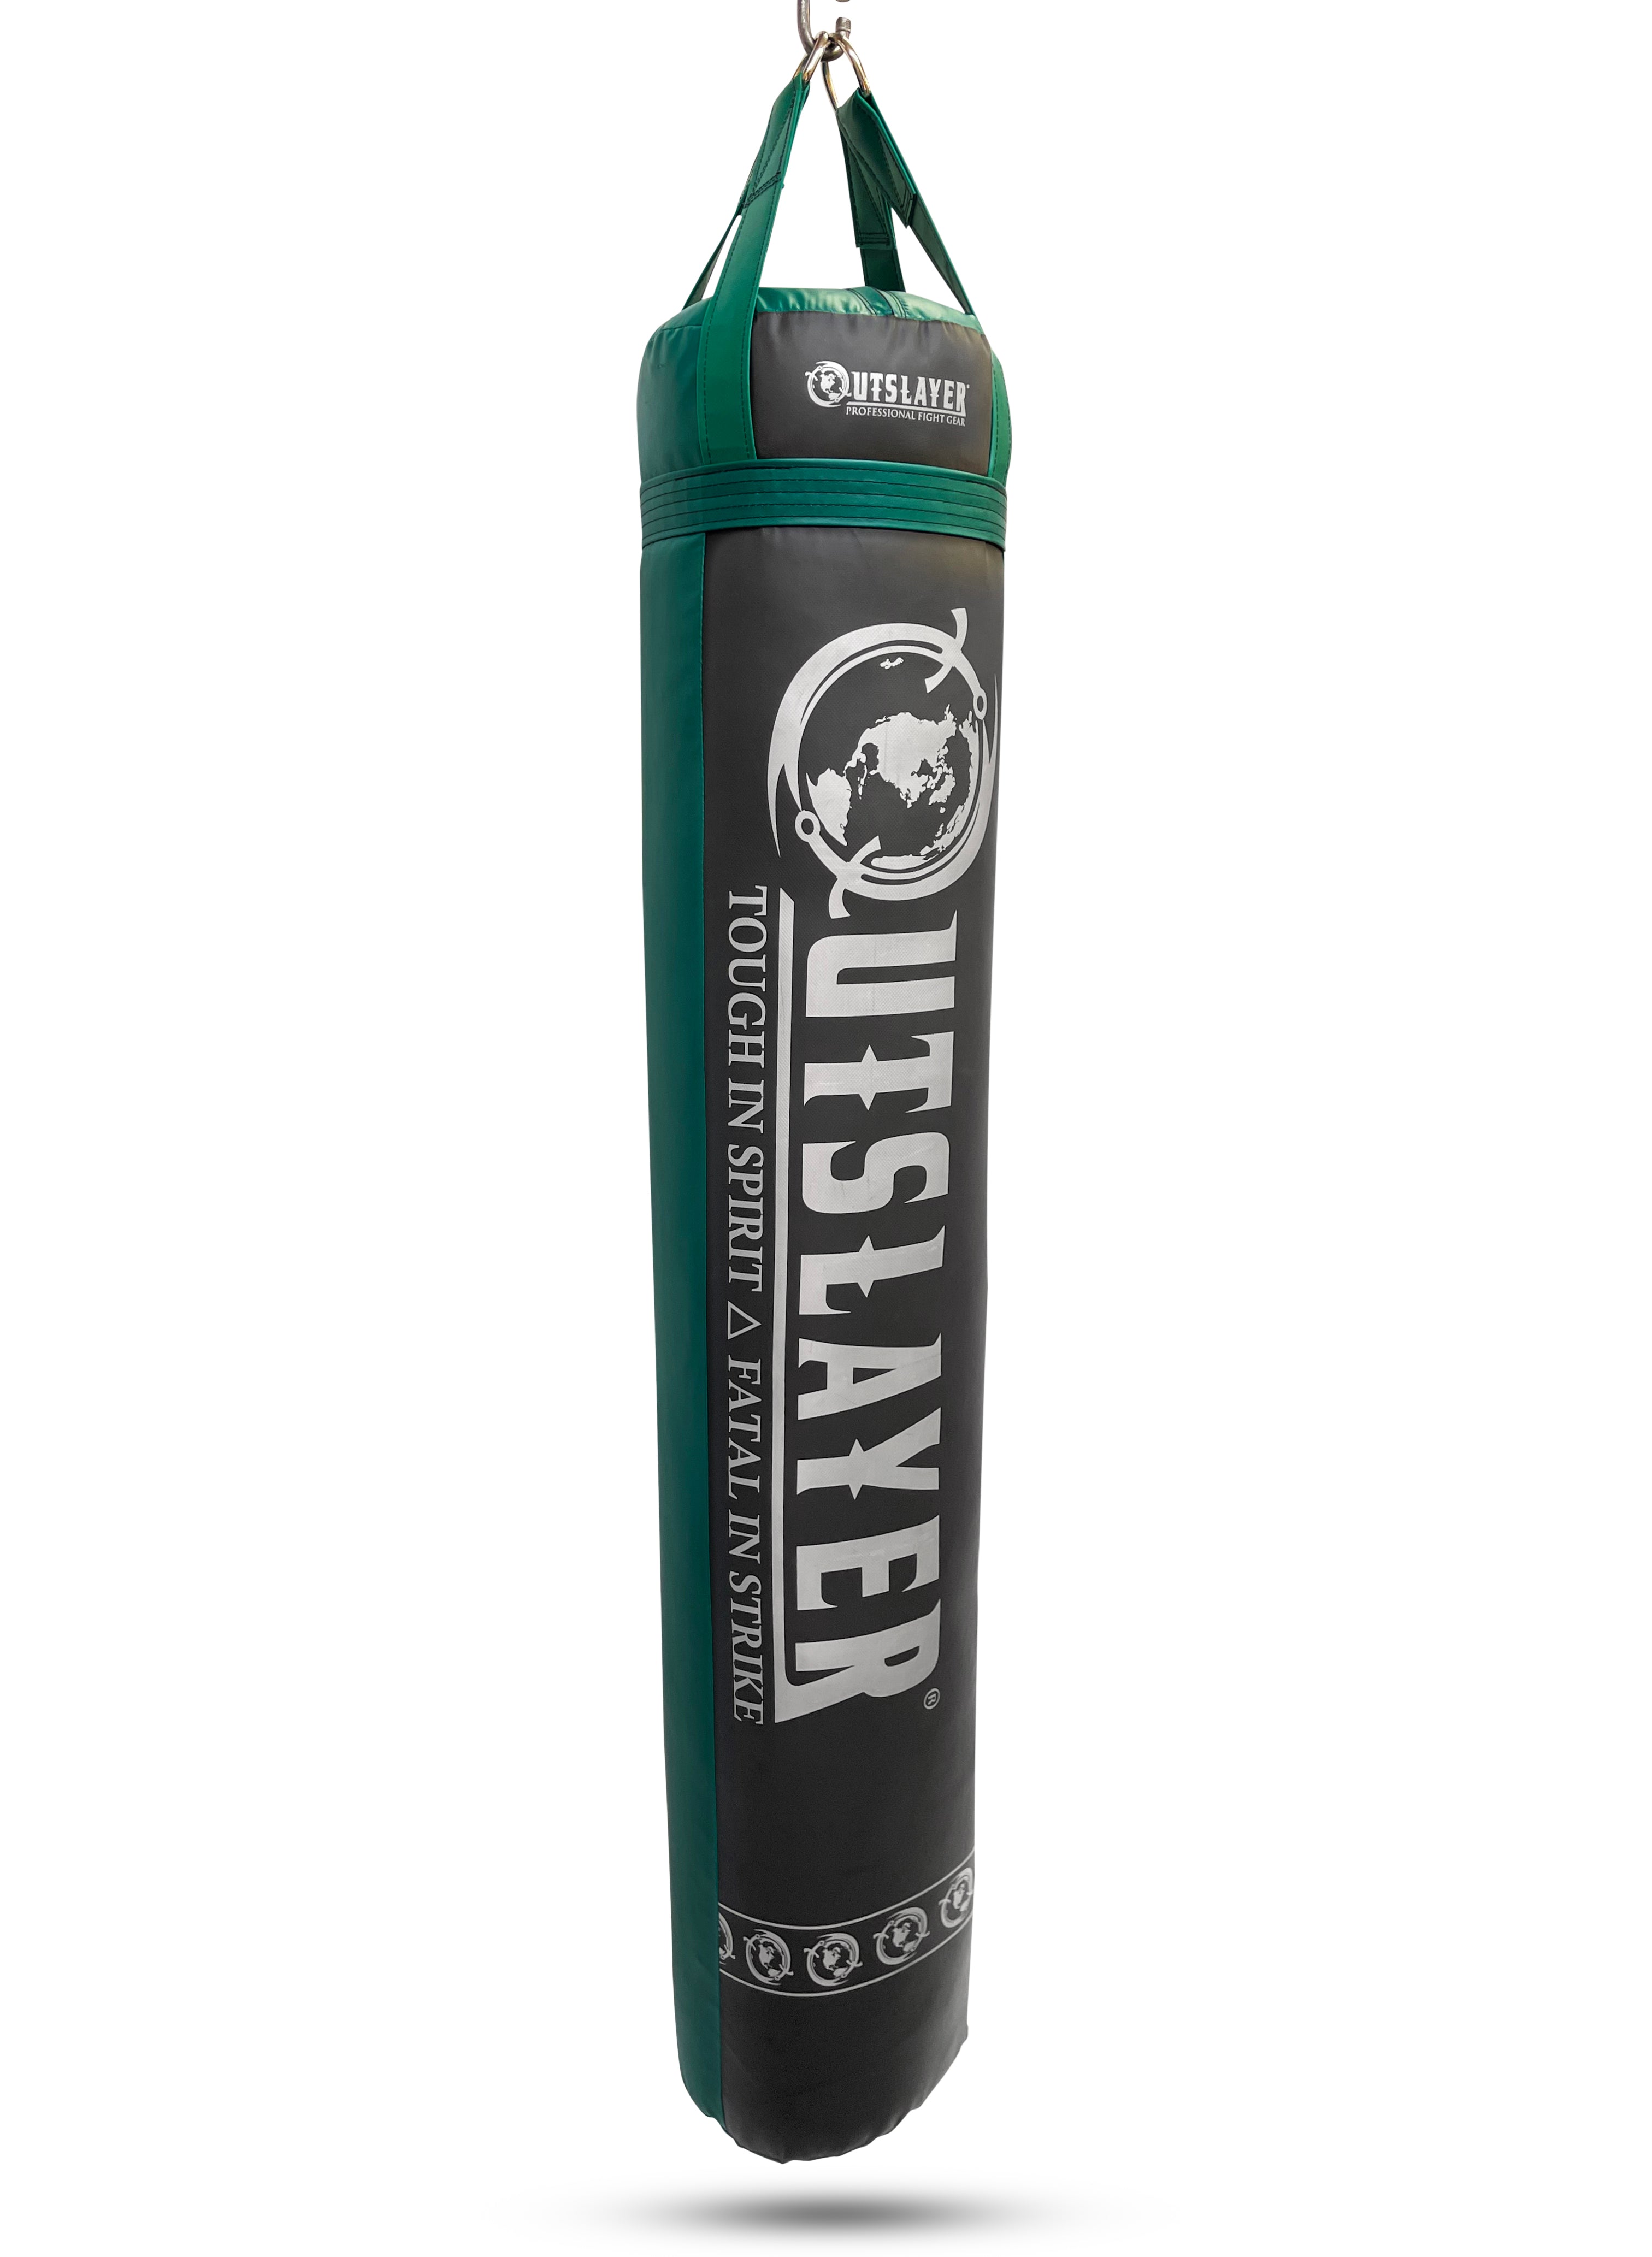 Outslayer CUSTOM PUNCHING BAGS DUAL COLOR STYLE - CHOOSE COLOR/SIZE